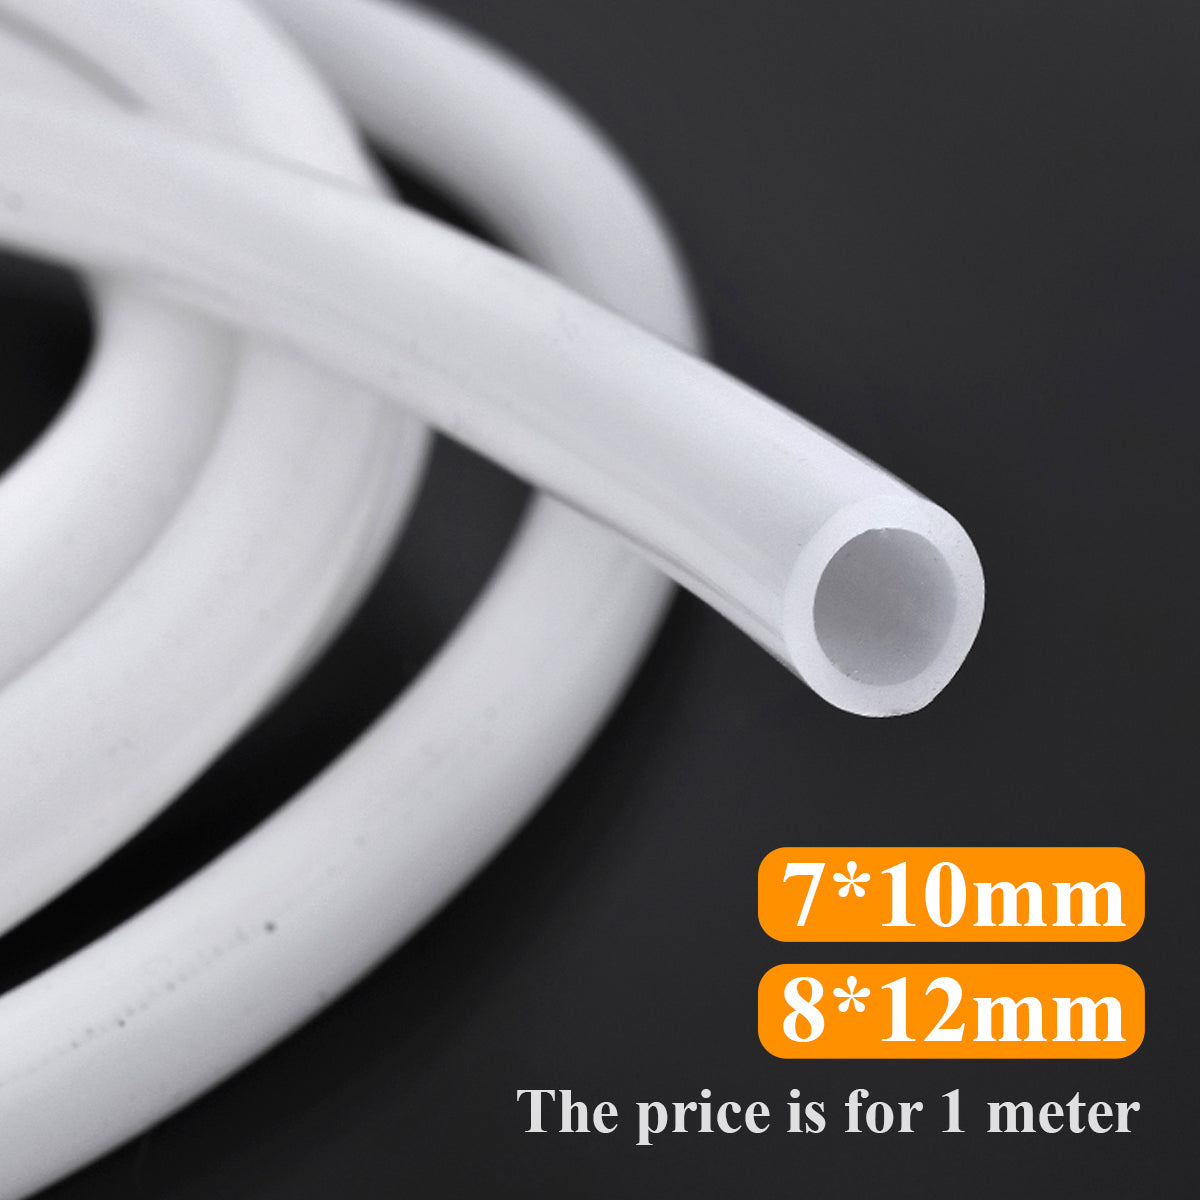 Startnow 7x10mm 8x12mm Silicone Tube Water Pipe Flexible Hose For Water Sensor & Pump & Chiller CO2 Laser Cutting Machine Parts